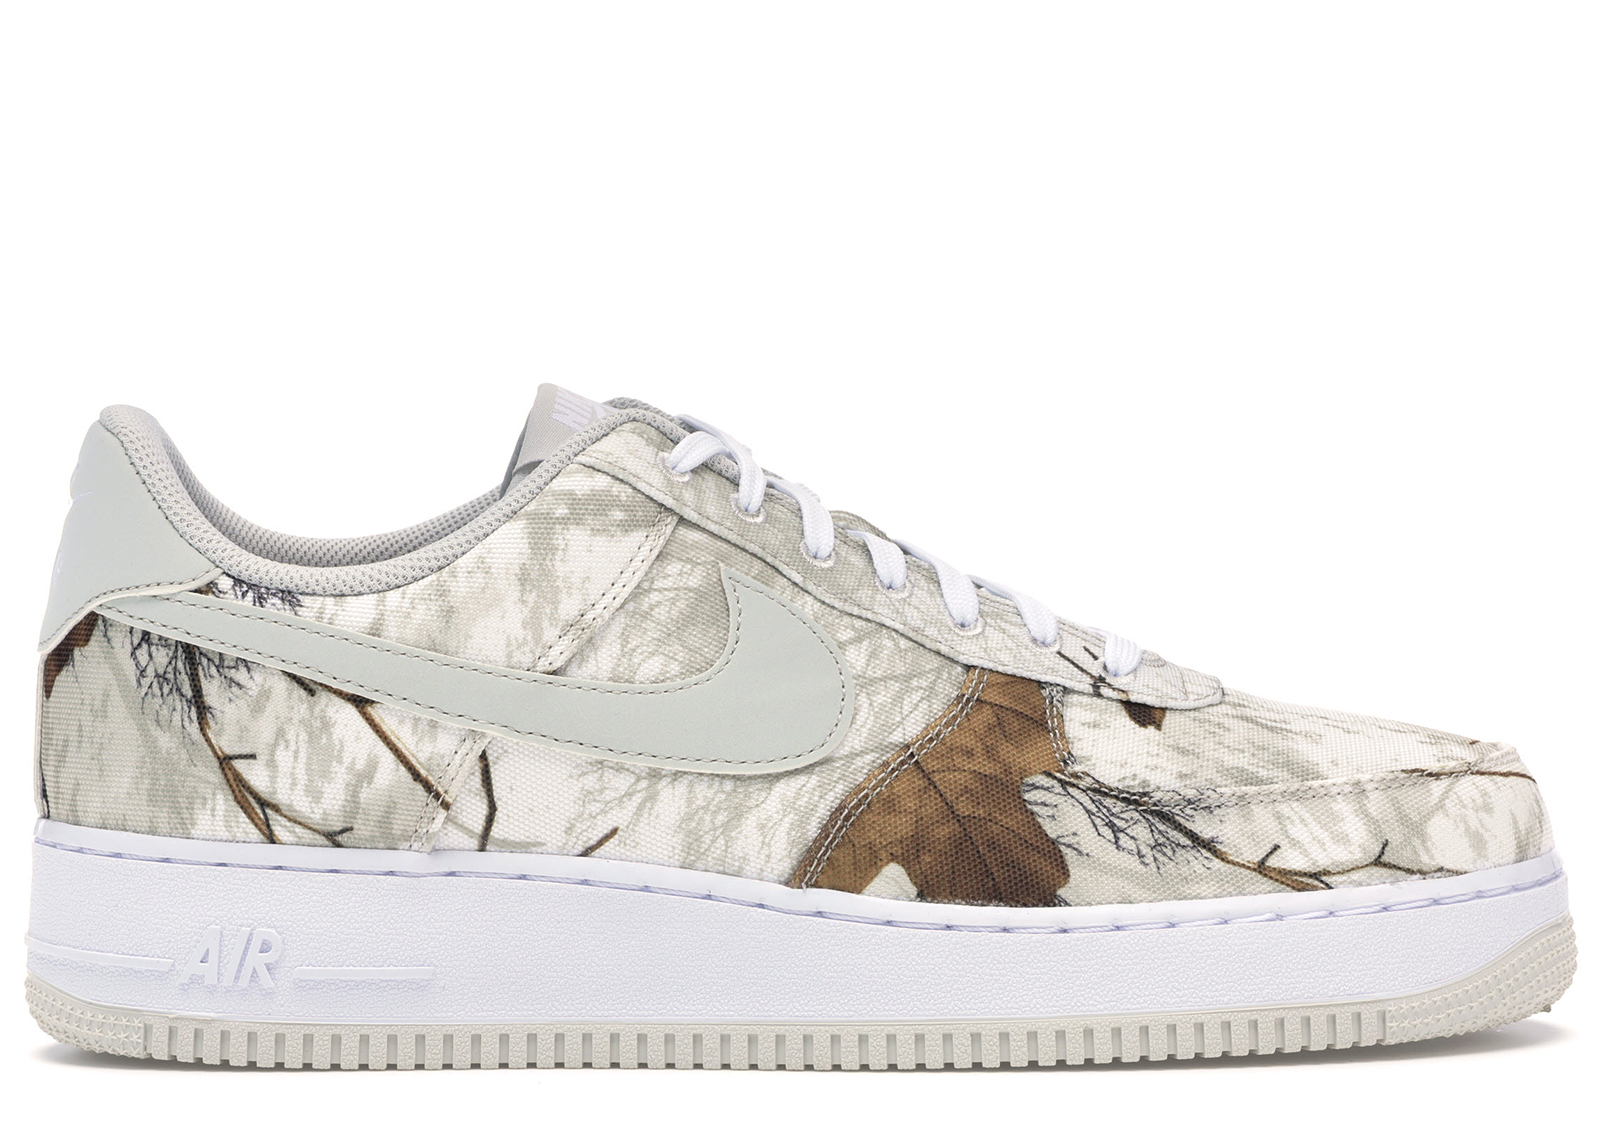 Nike Air Force 1 Low Realtree White - AO2441-100 - US